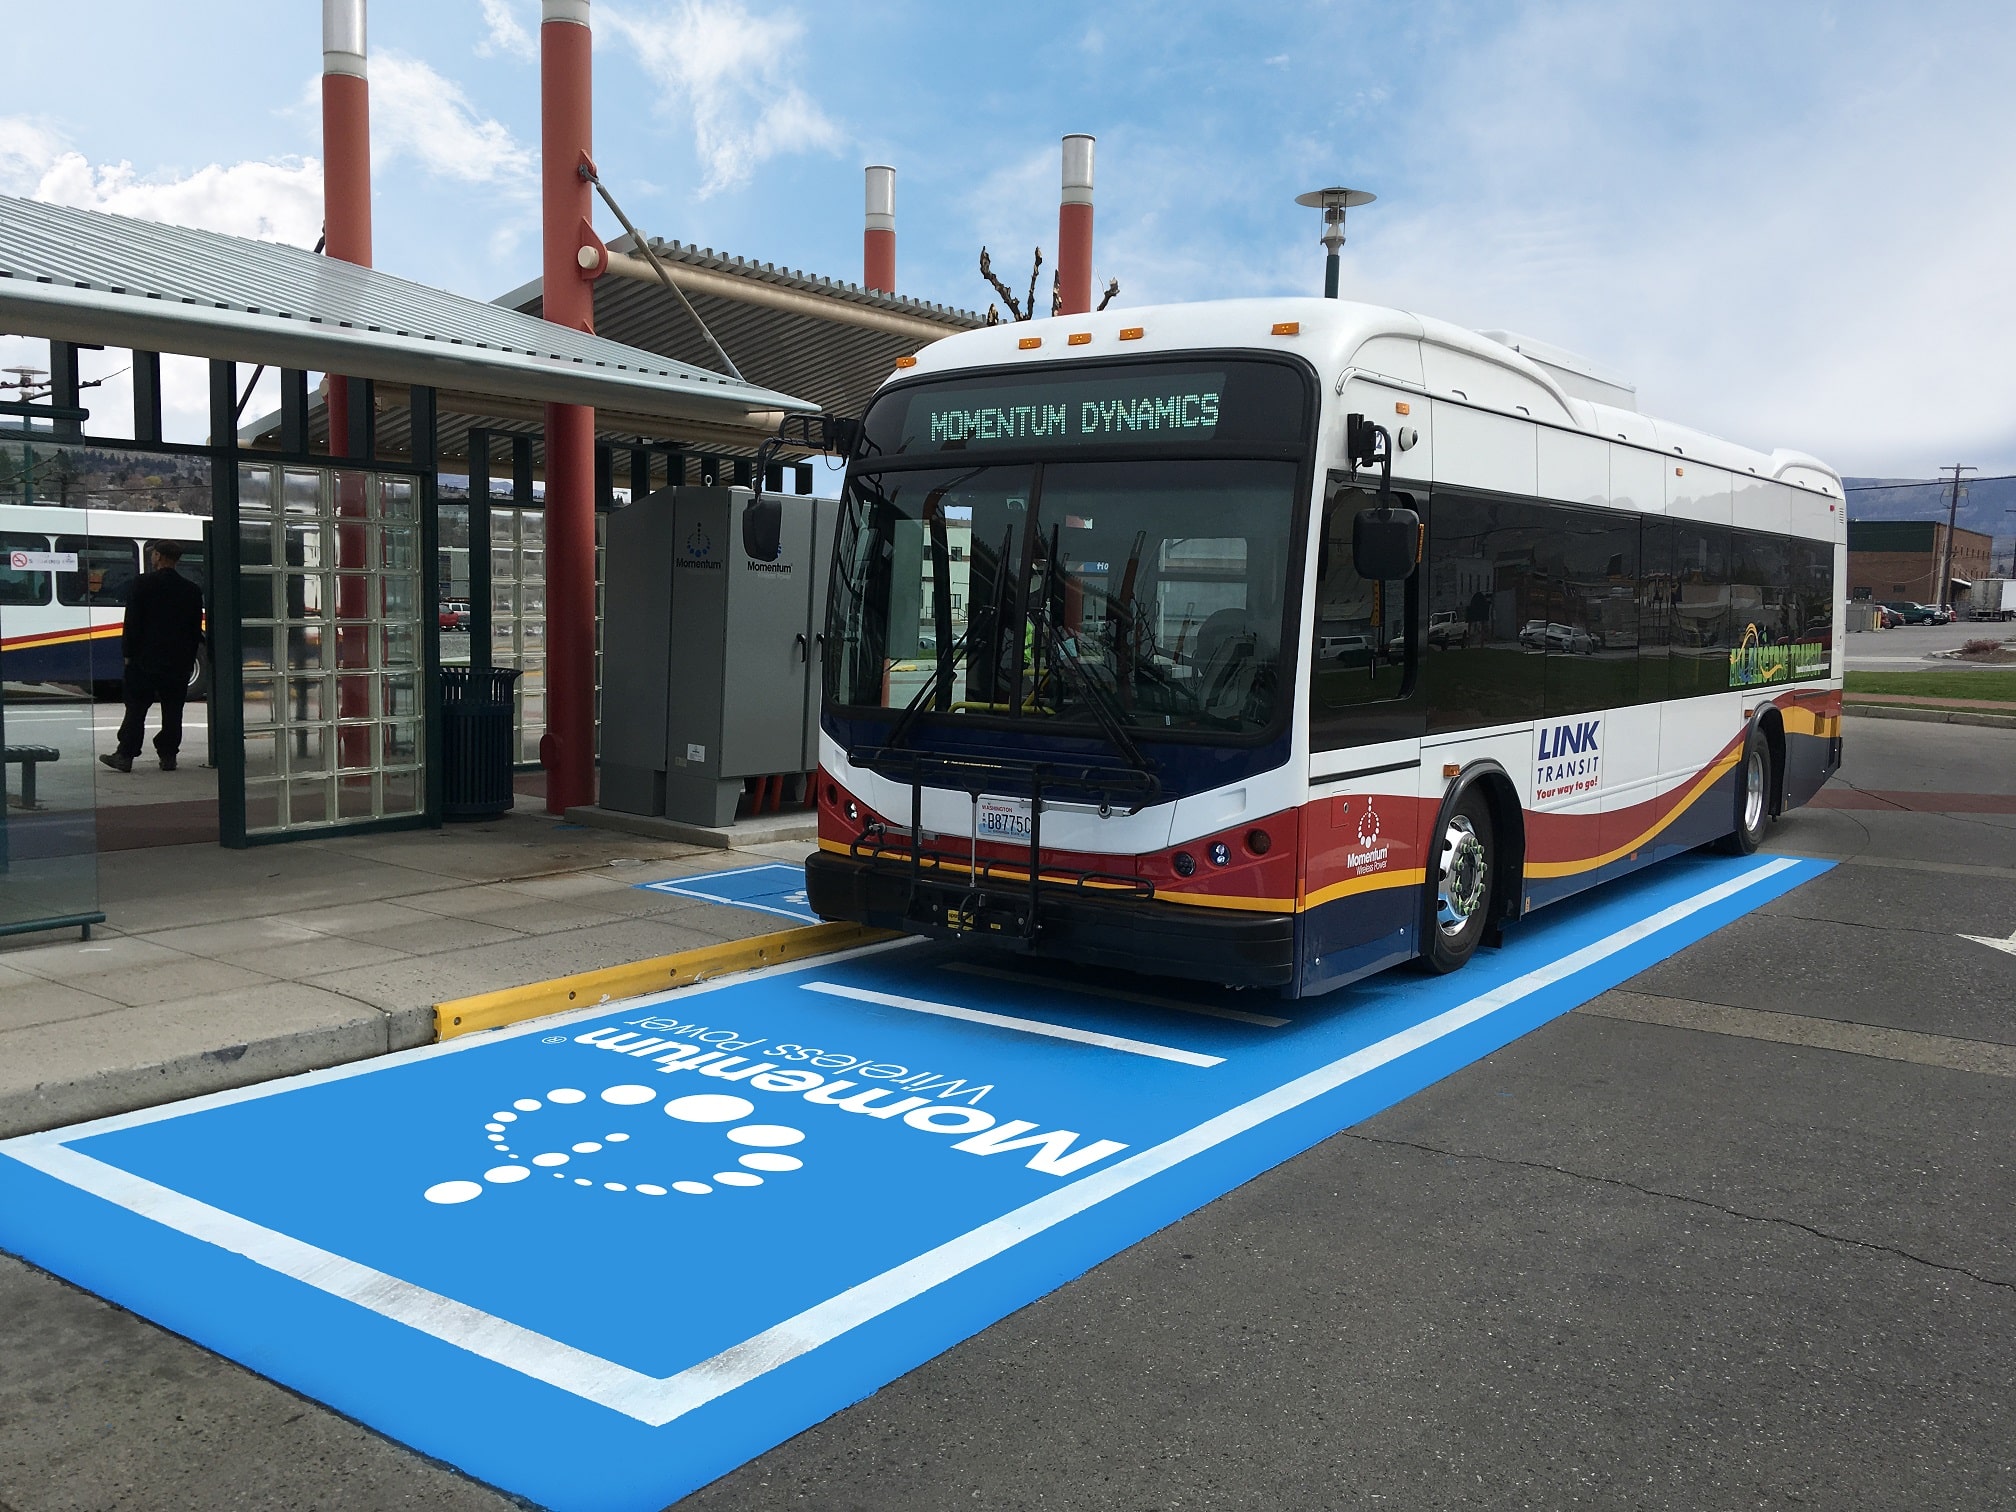 Opportunity charging can cut costs, says Kleanbus CEO